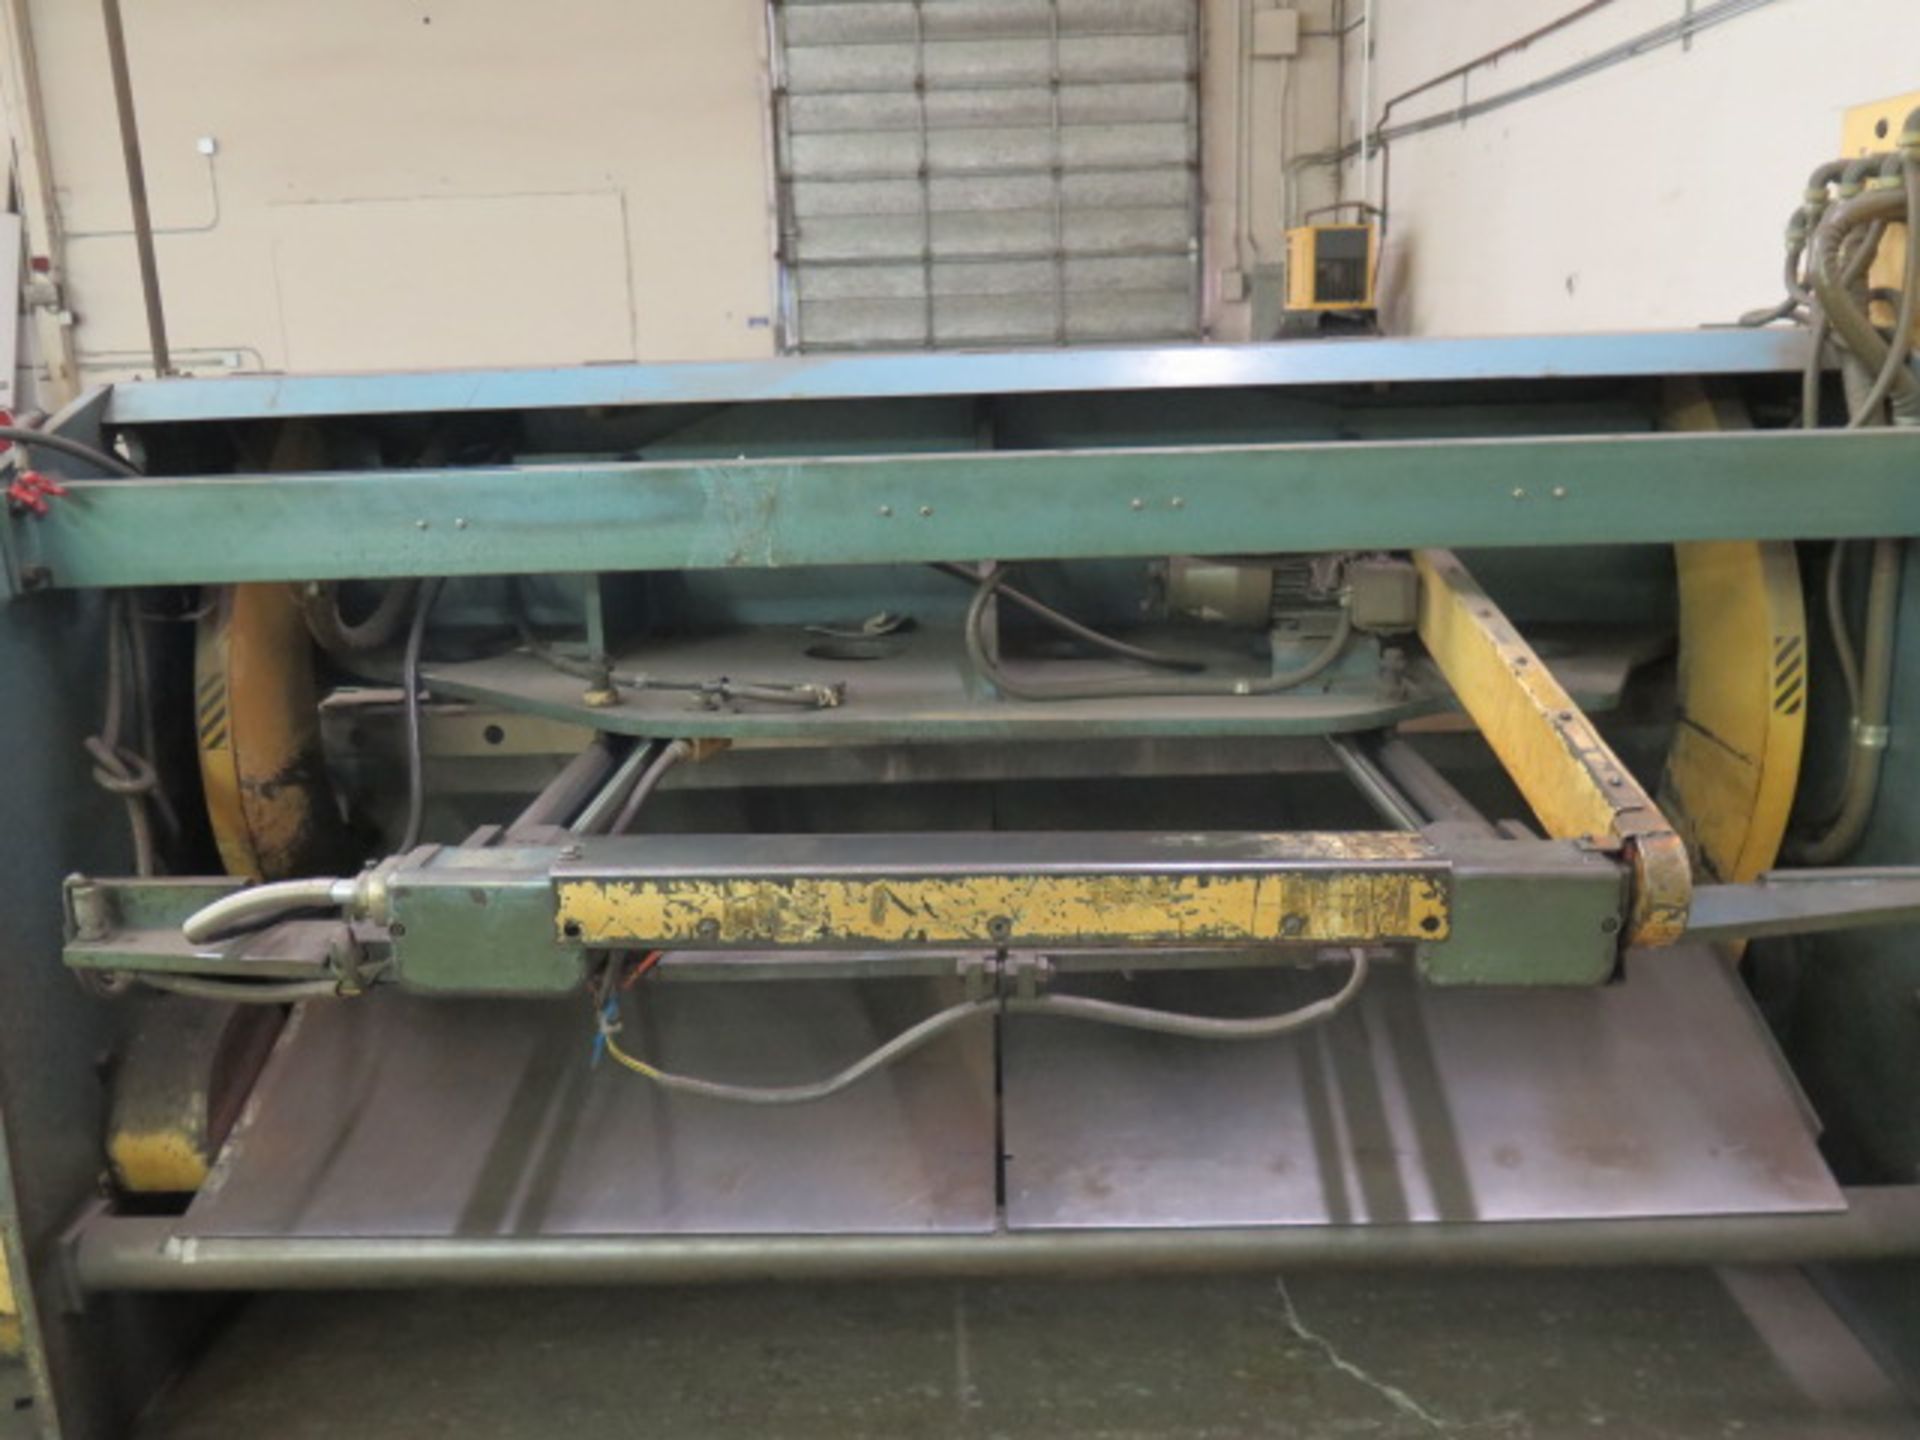 Amada M-204578" Power Shear s/n 2401174 w/ Amada Controls and Back Gage, 83" Squar Arm, SOLD AS IS - Image 11 of 12